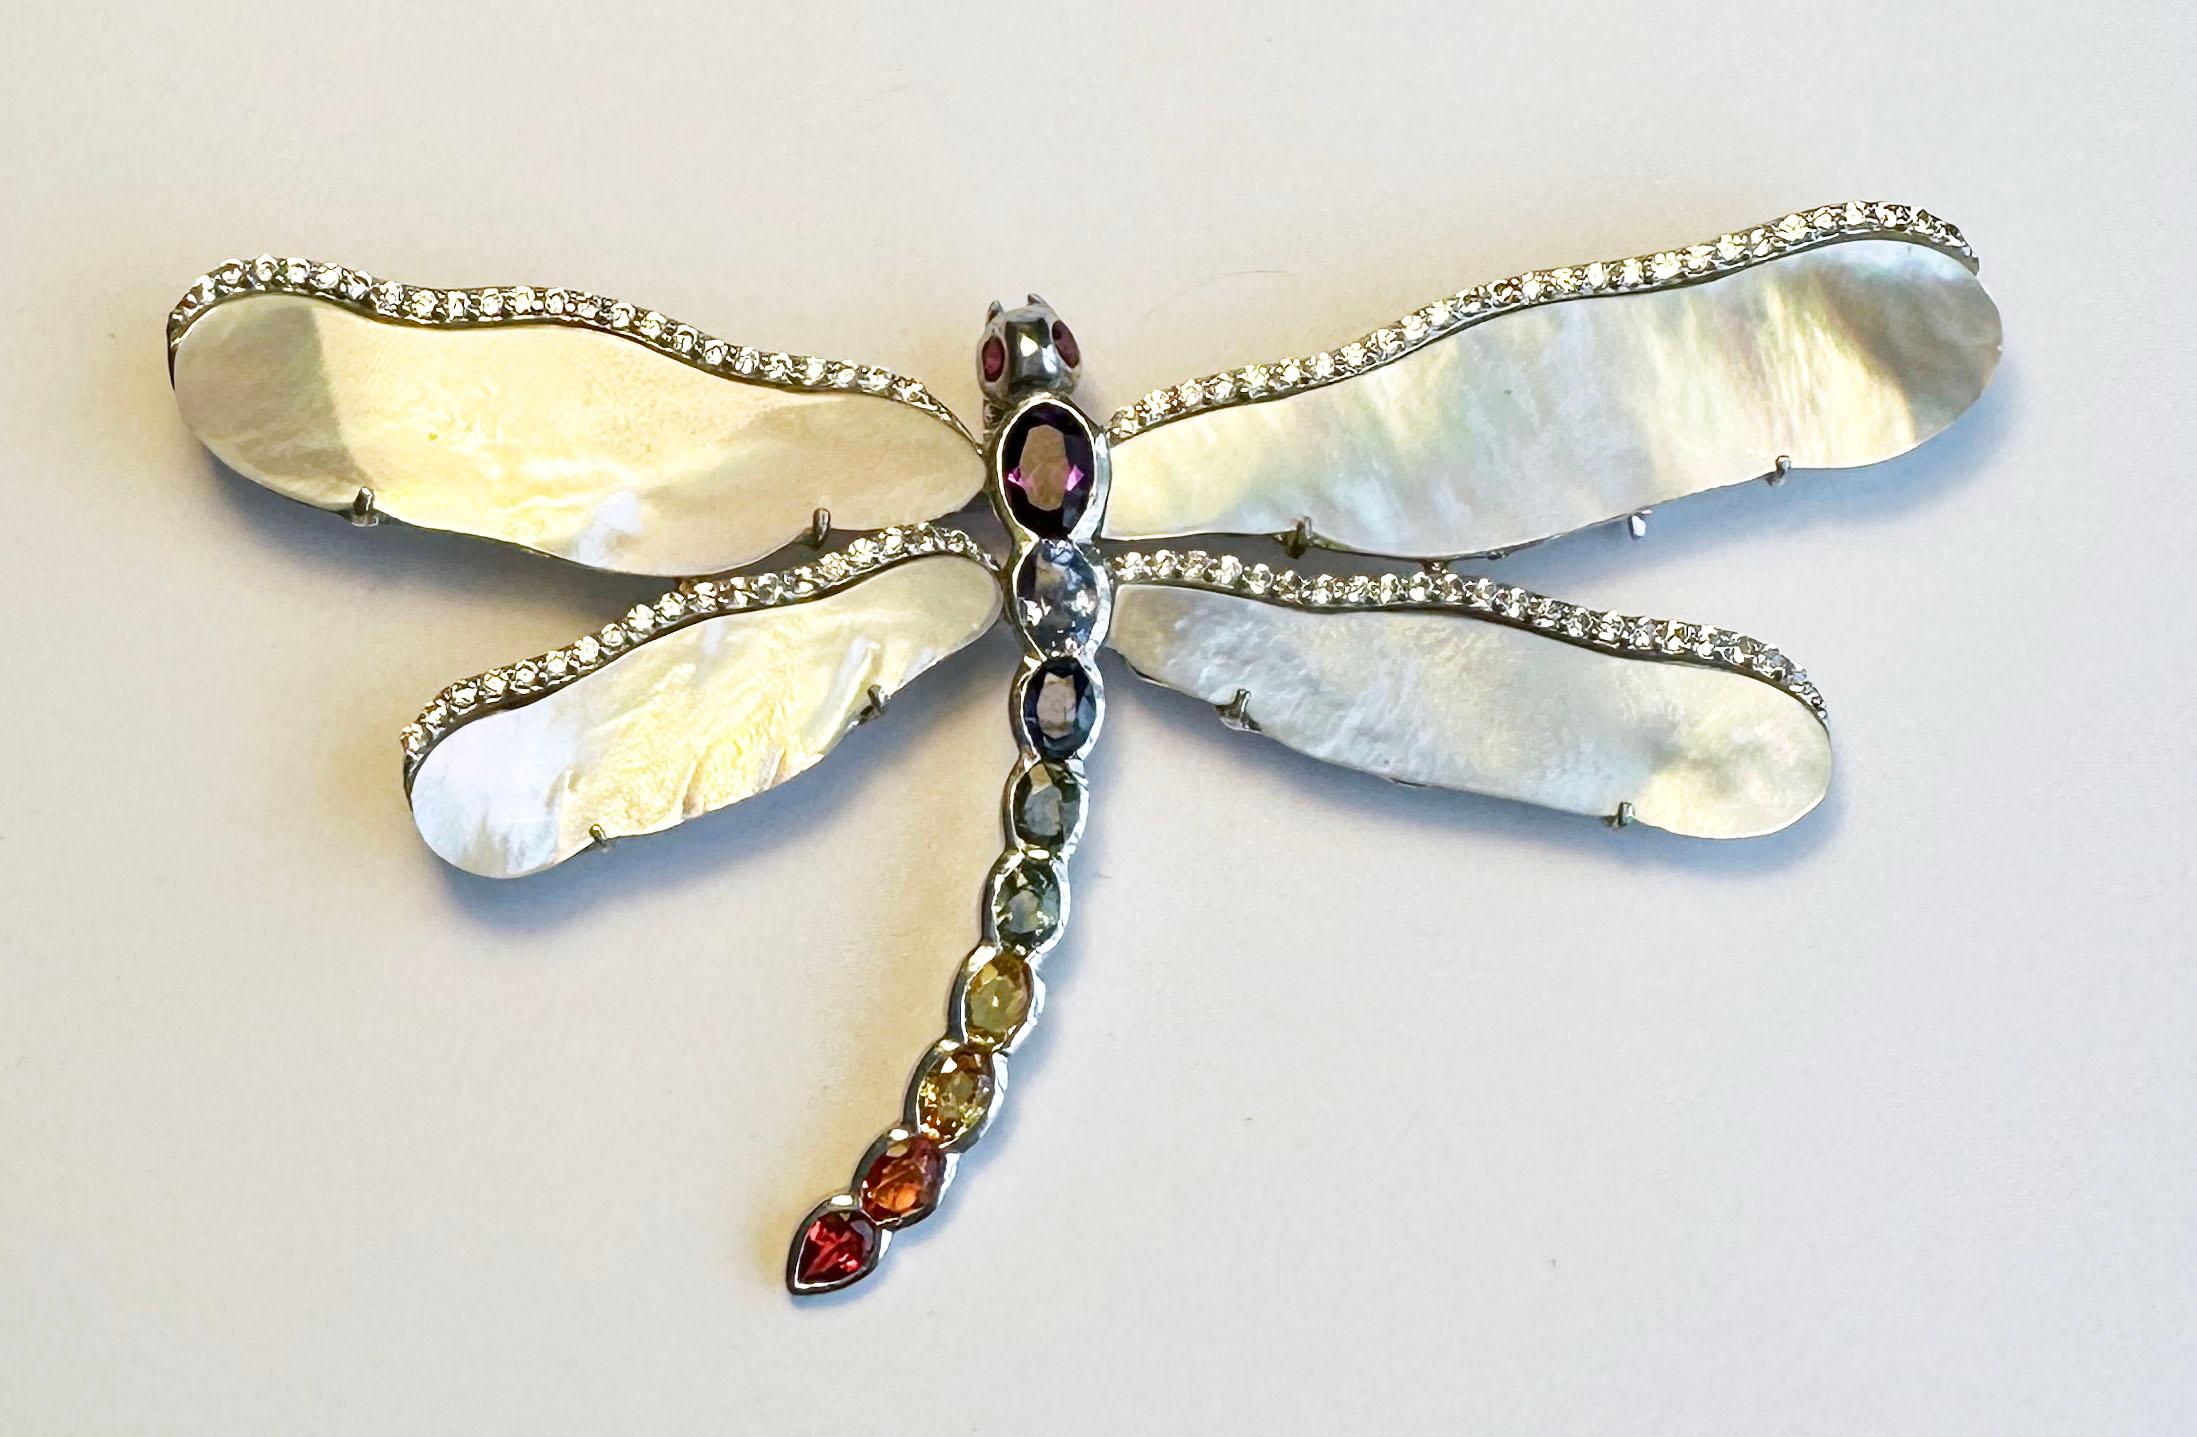 A Silver Dragonfly Brooch/Pendant set with Sapphires For Sale 5